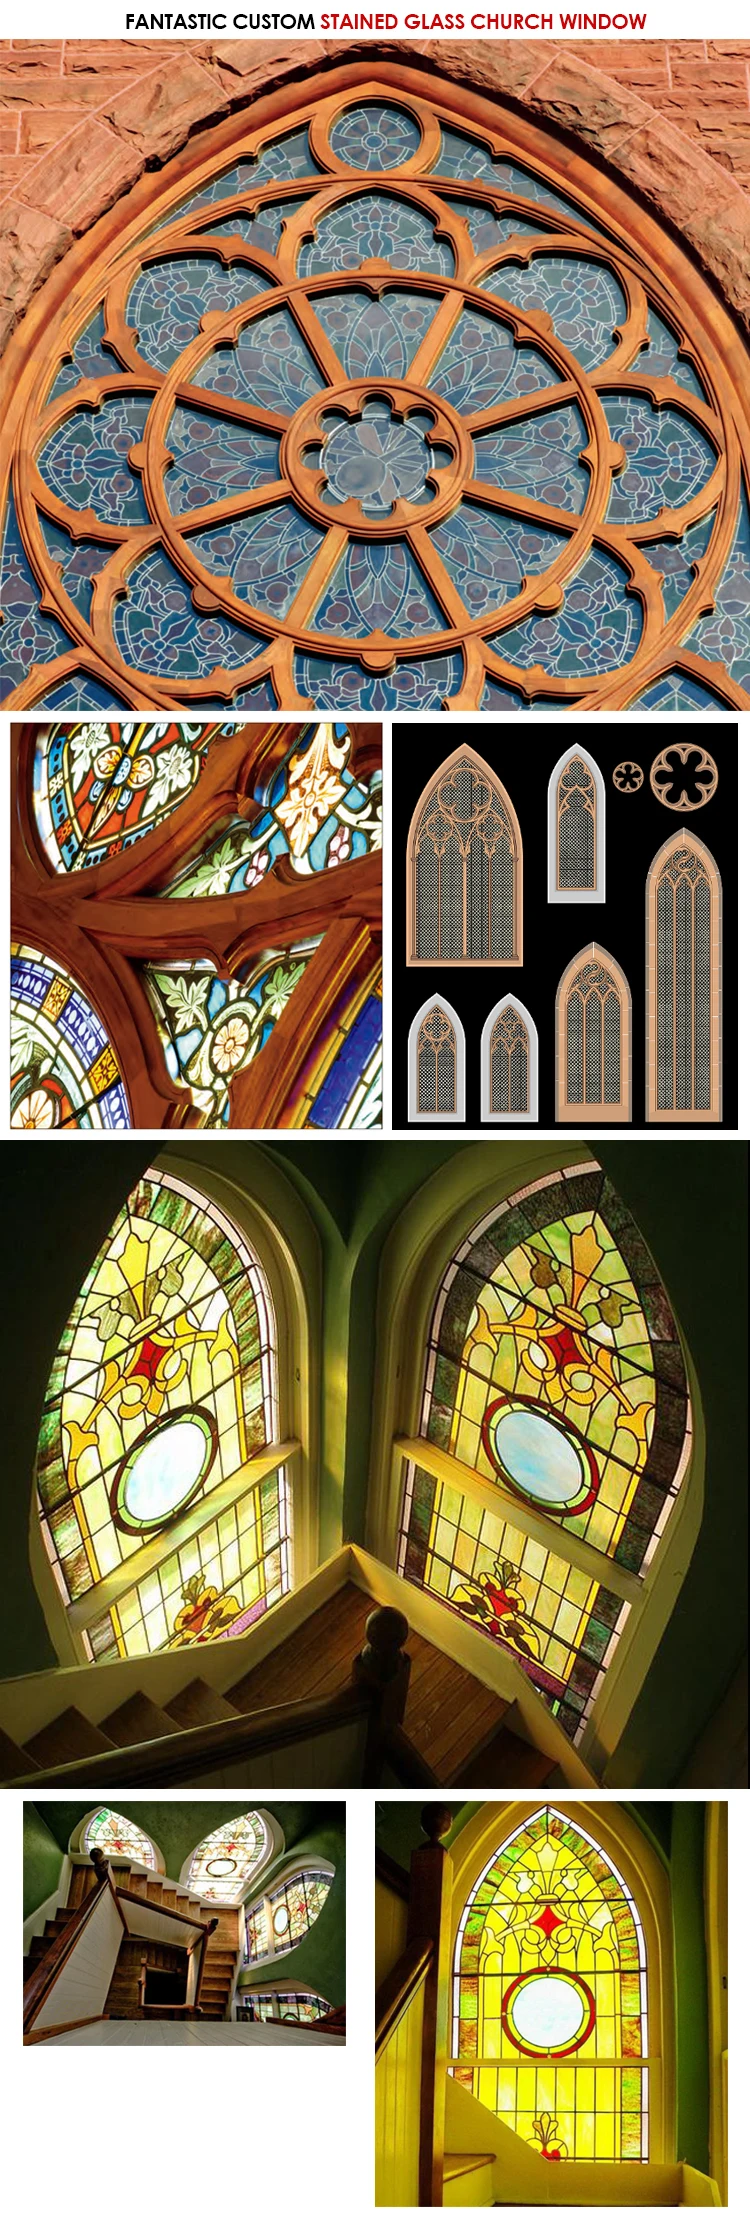 Inexpensive stained glass windows images of huge window